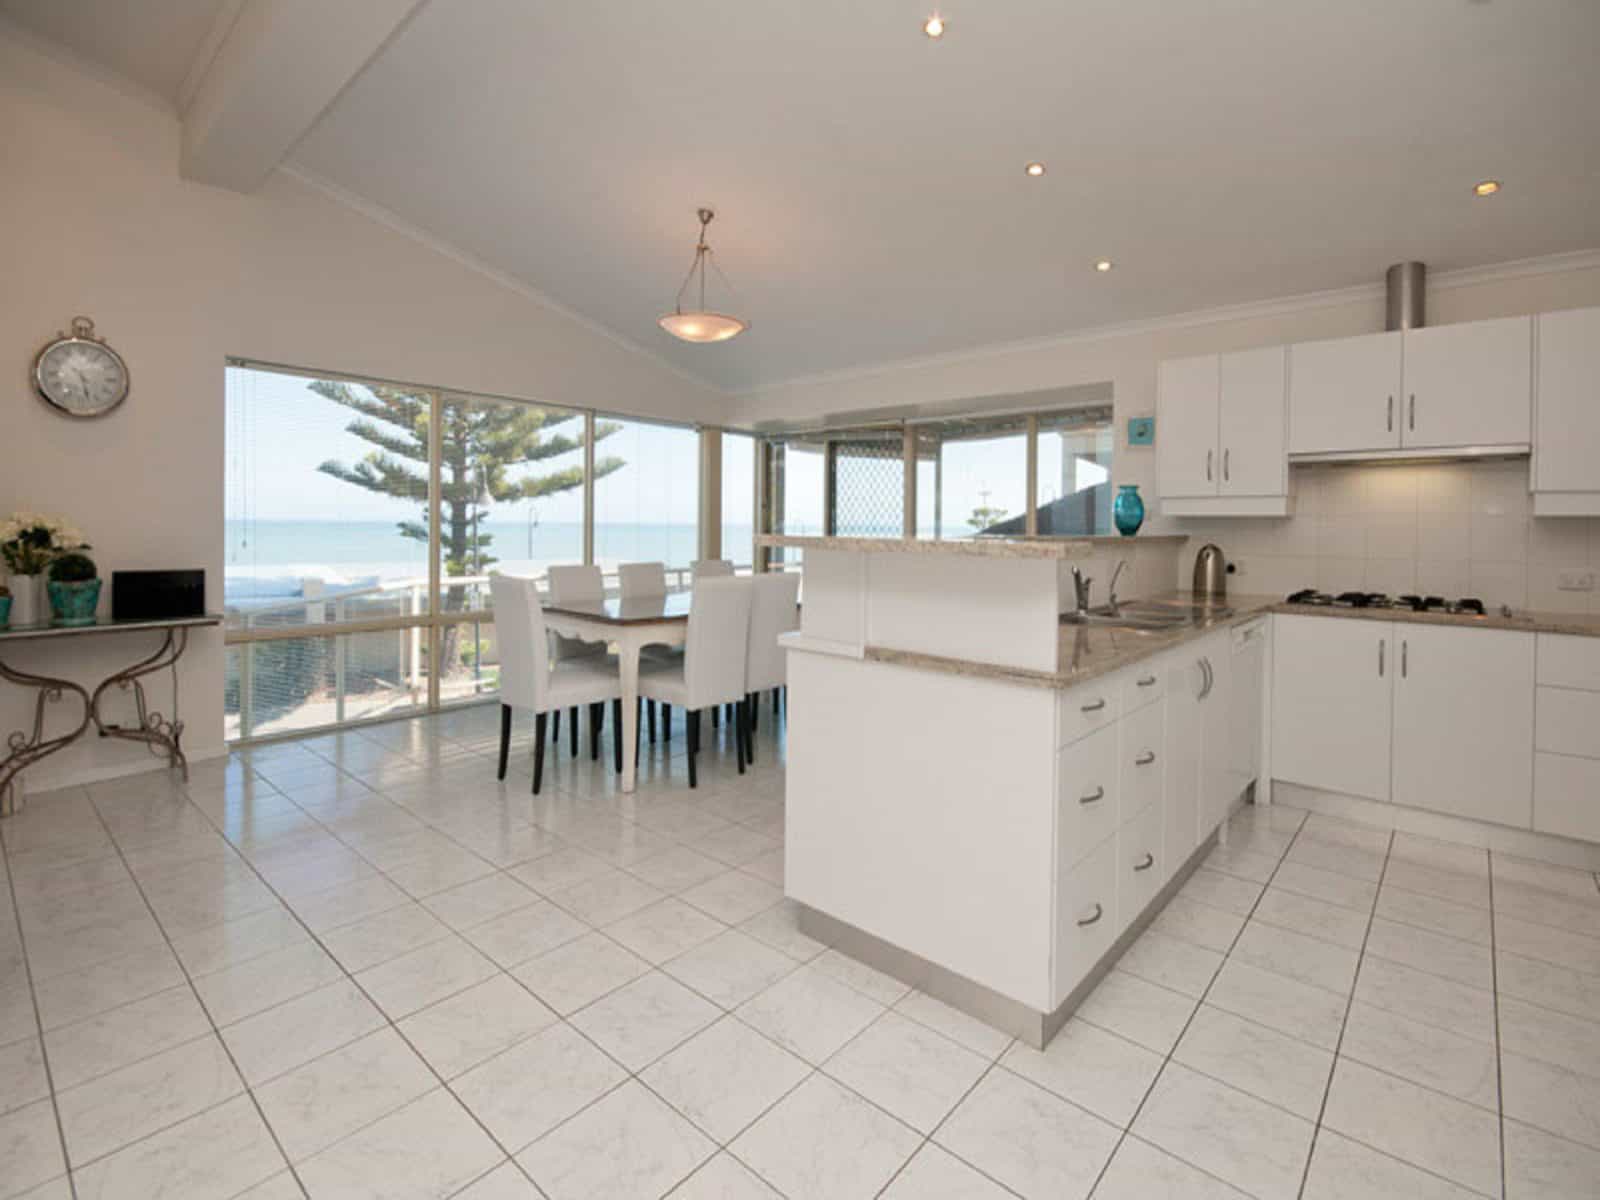 Spectacular sea views from all living areas and the kitchen.